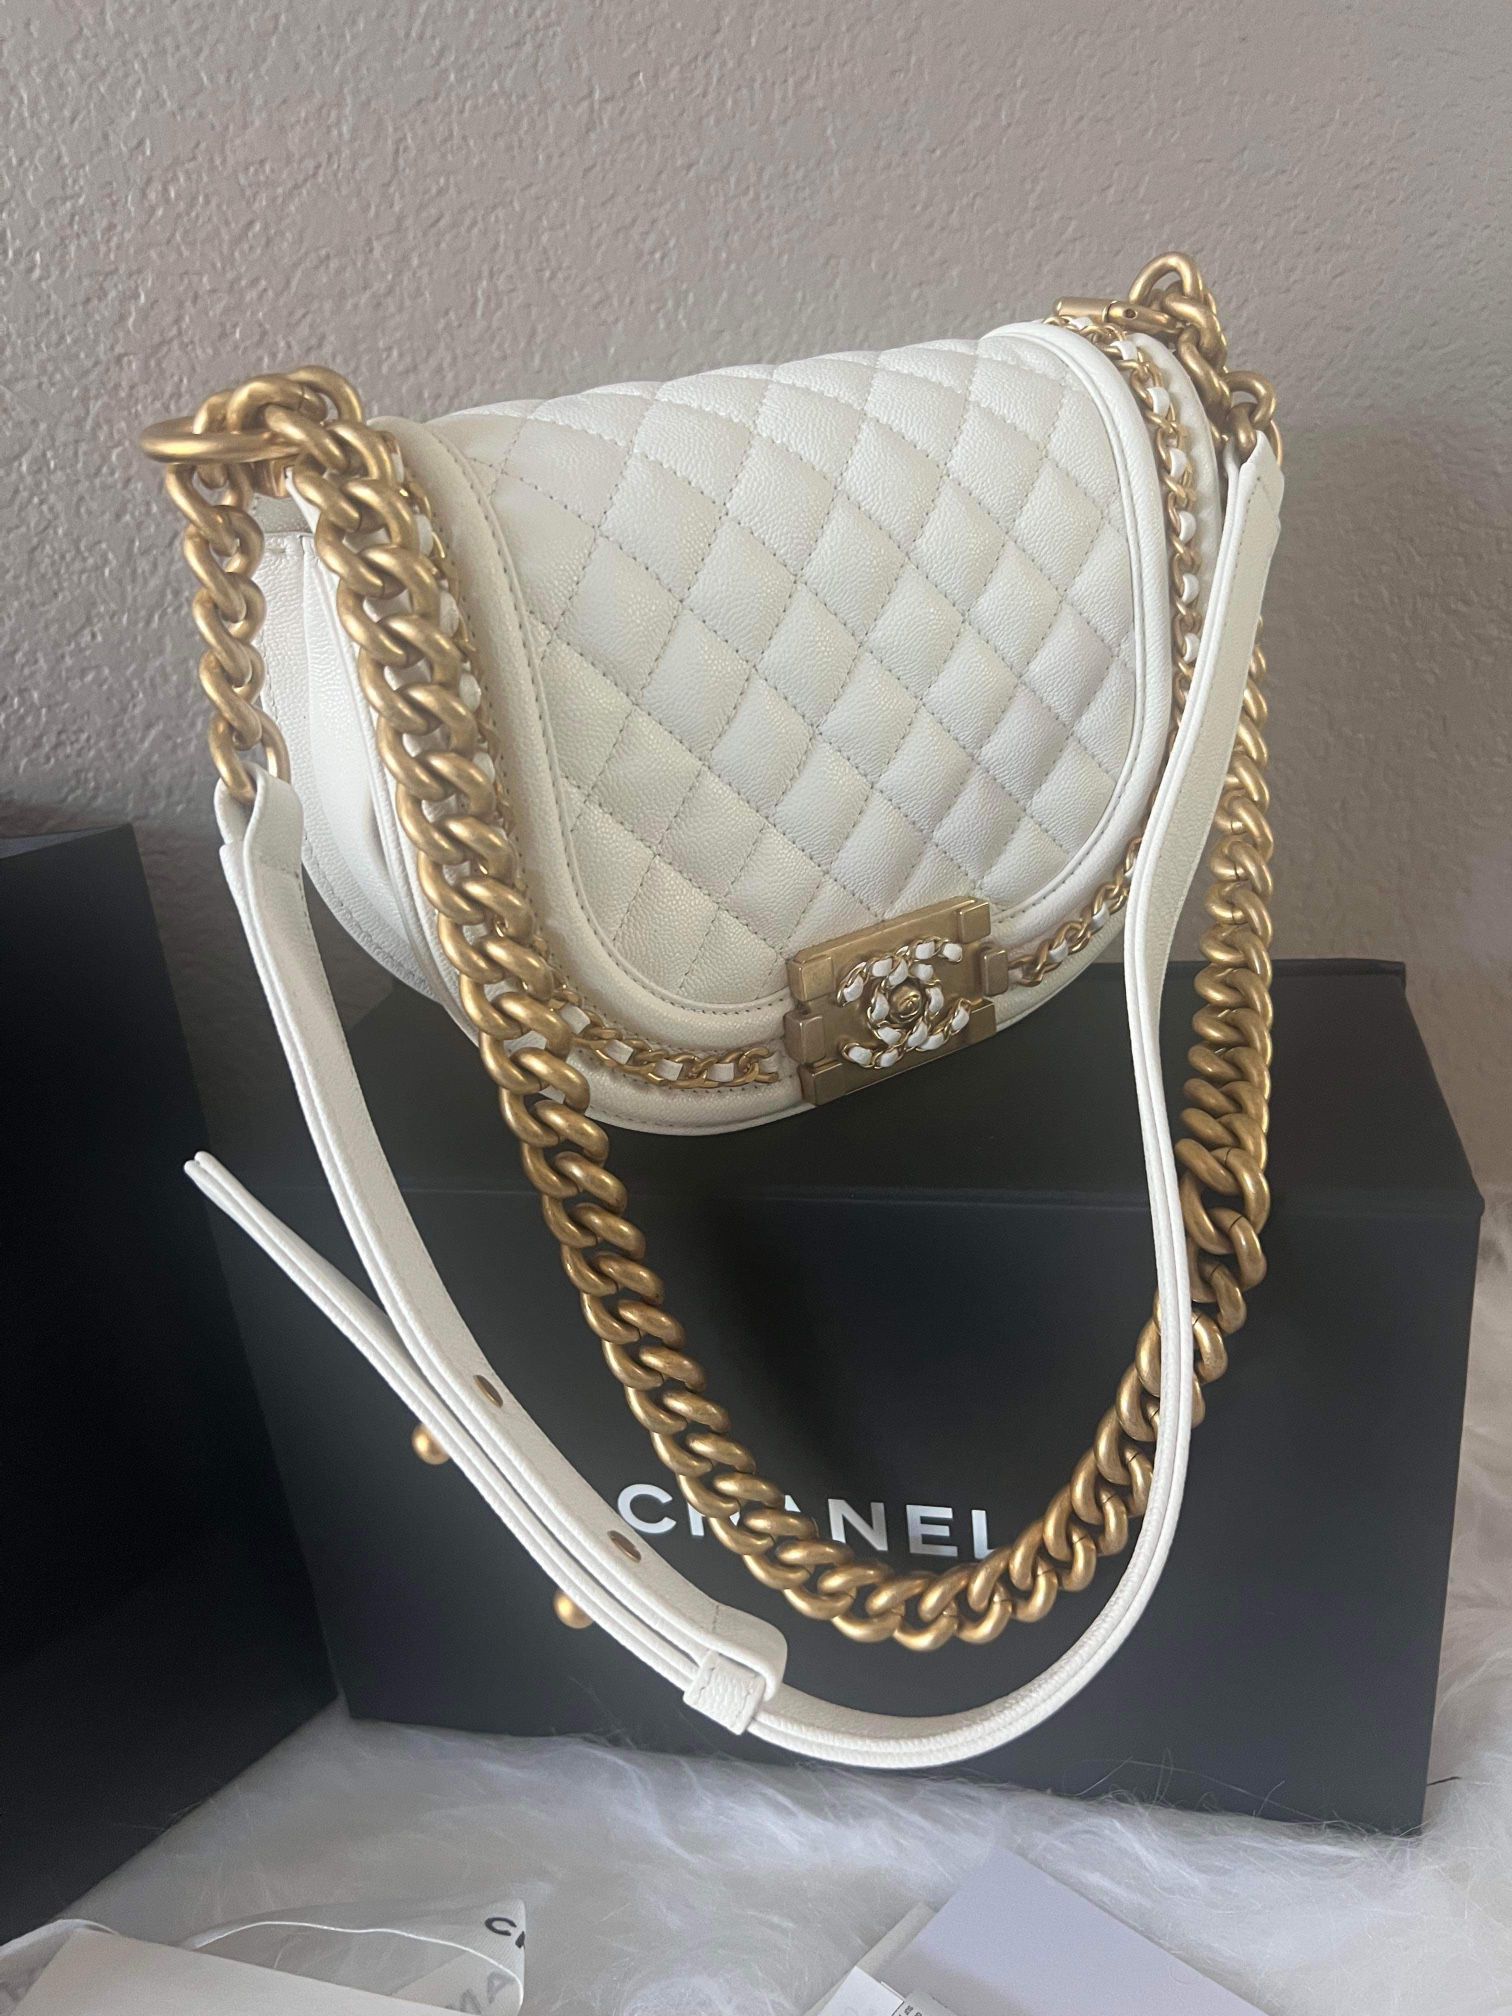 💯 Authentic Chanel White Classic Crossbody Bag With Receipt 